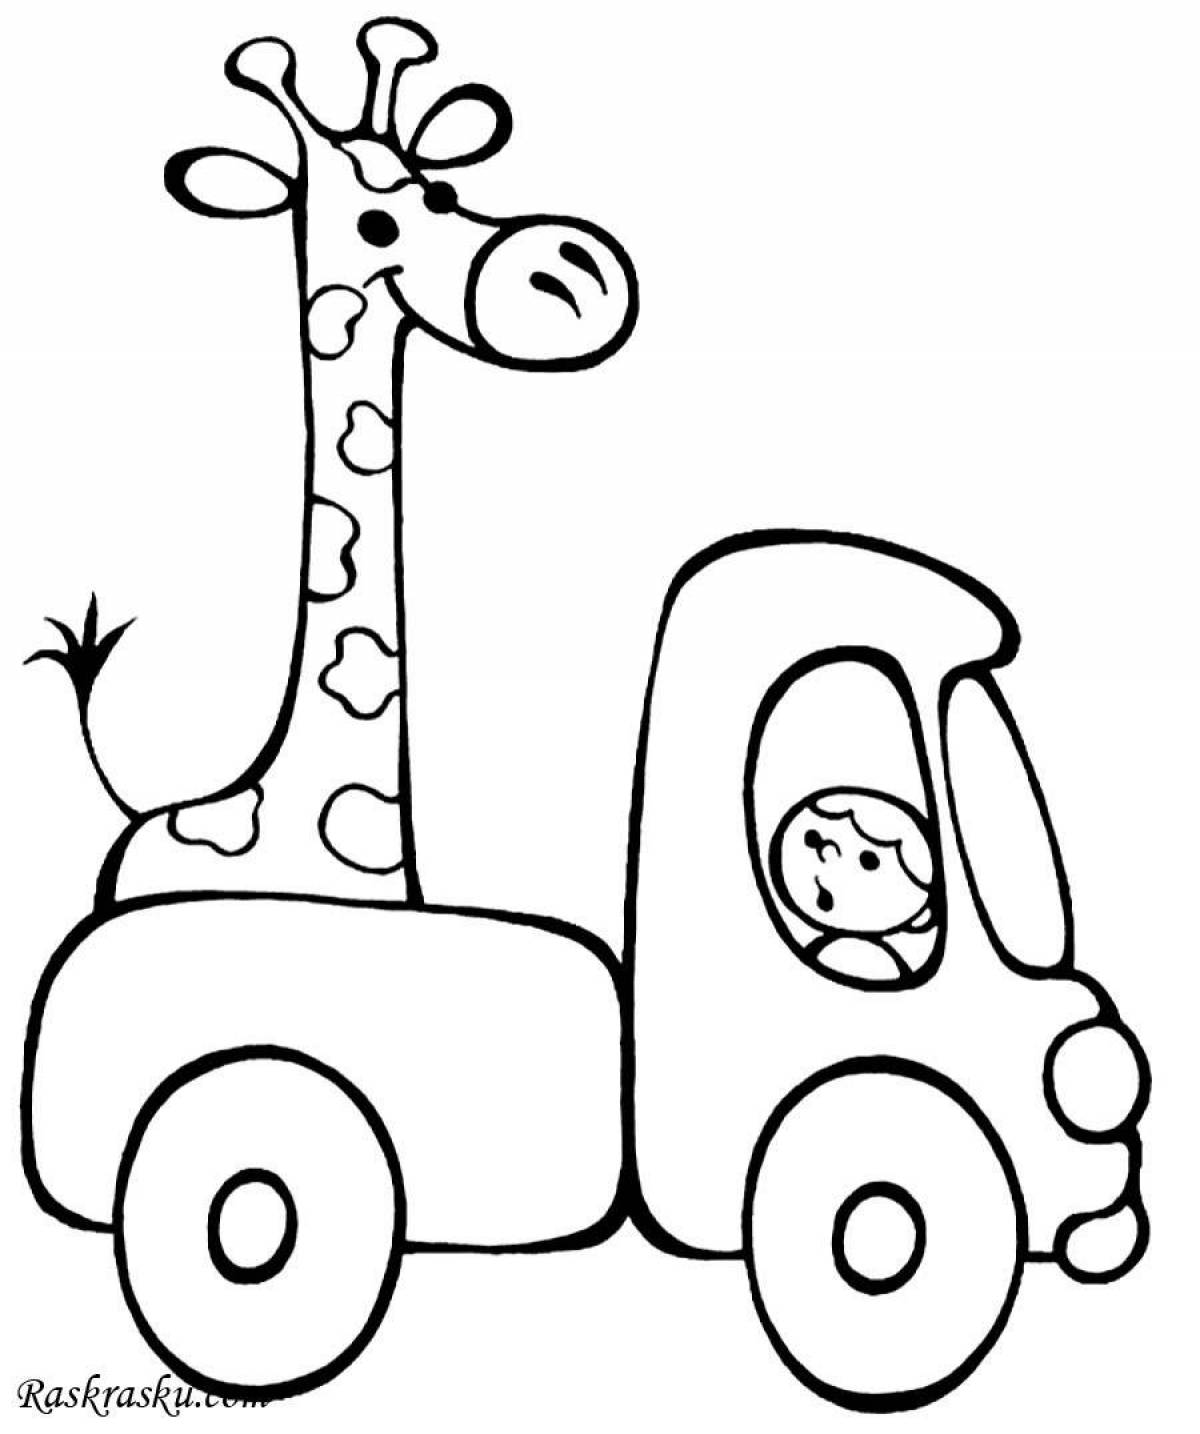 Coloring pages incredible cars for children 3-4 years old